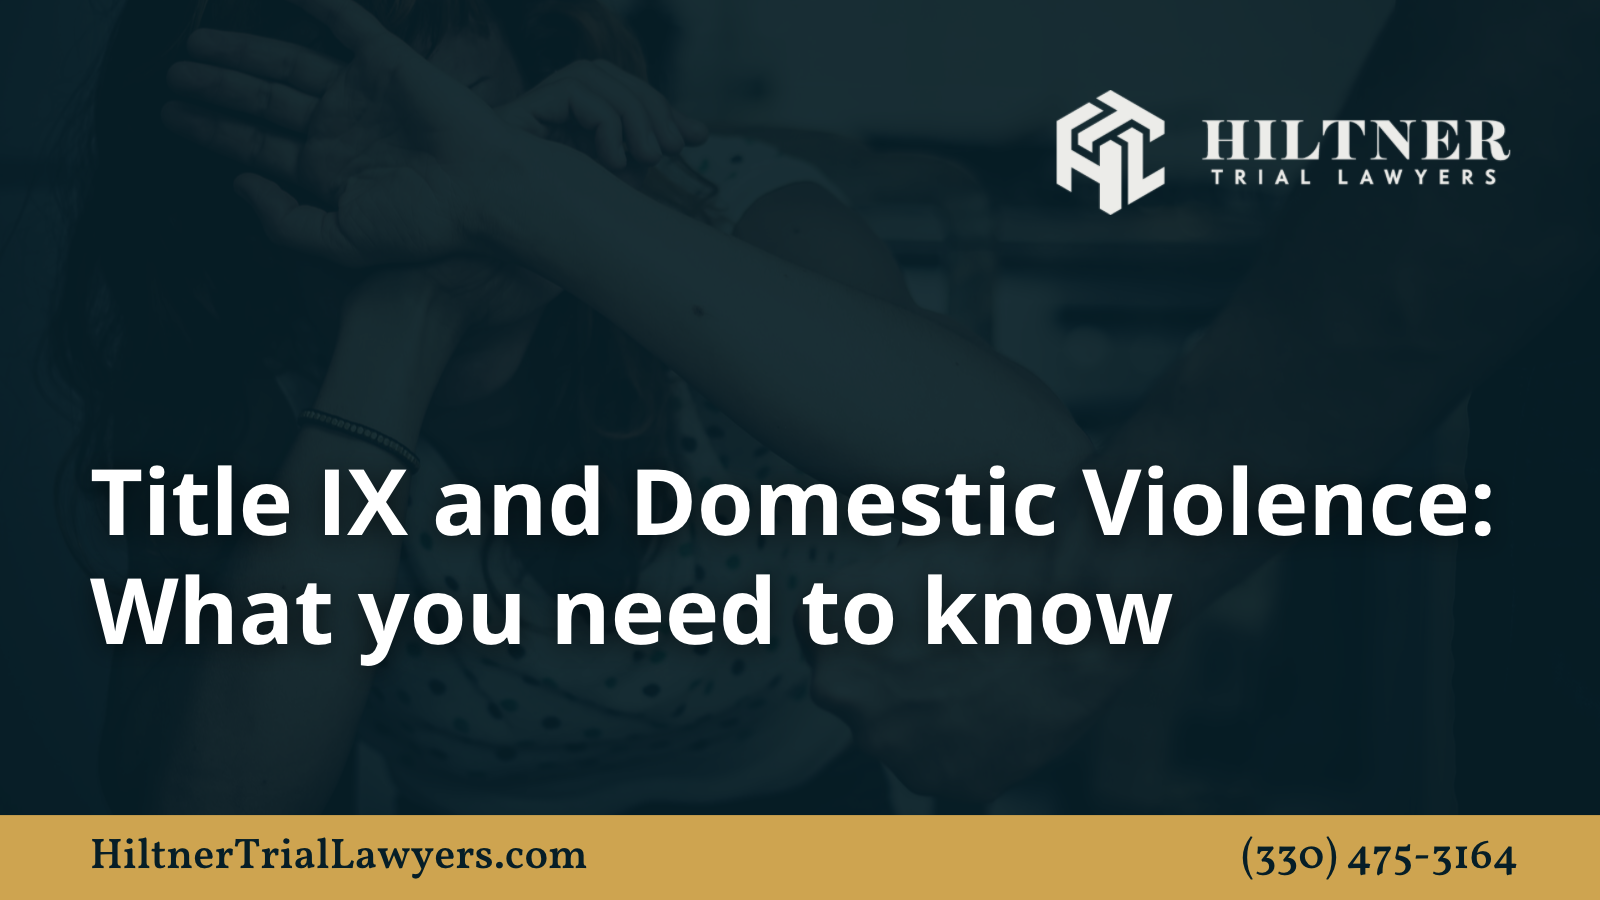 Title IX and Domestic Violence - Hiltner Trial Lawyers Ohio - max hiltner